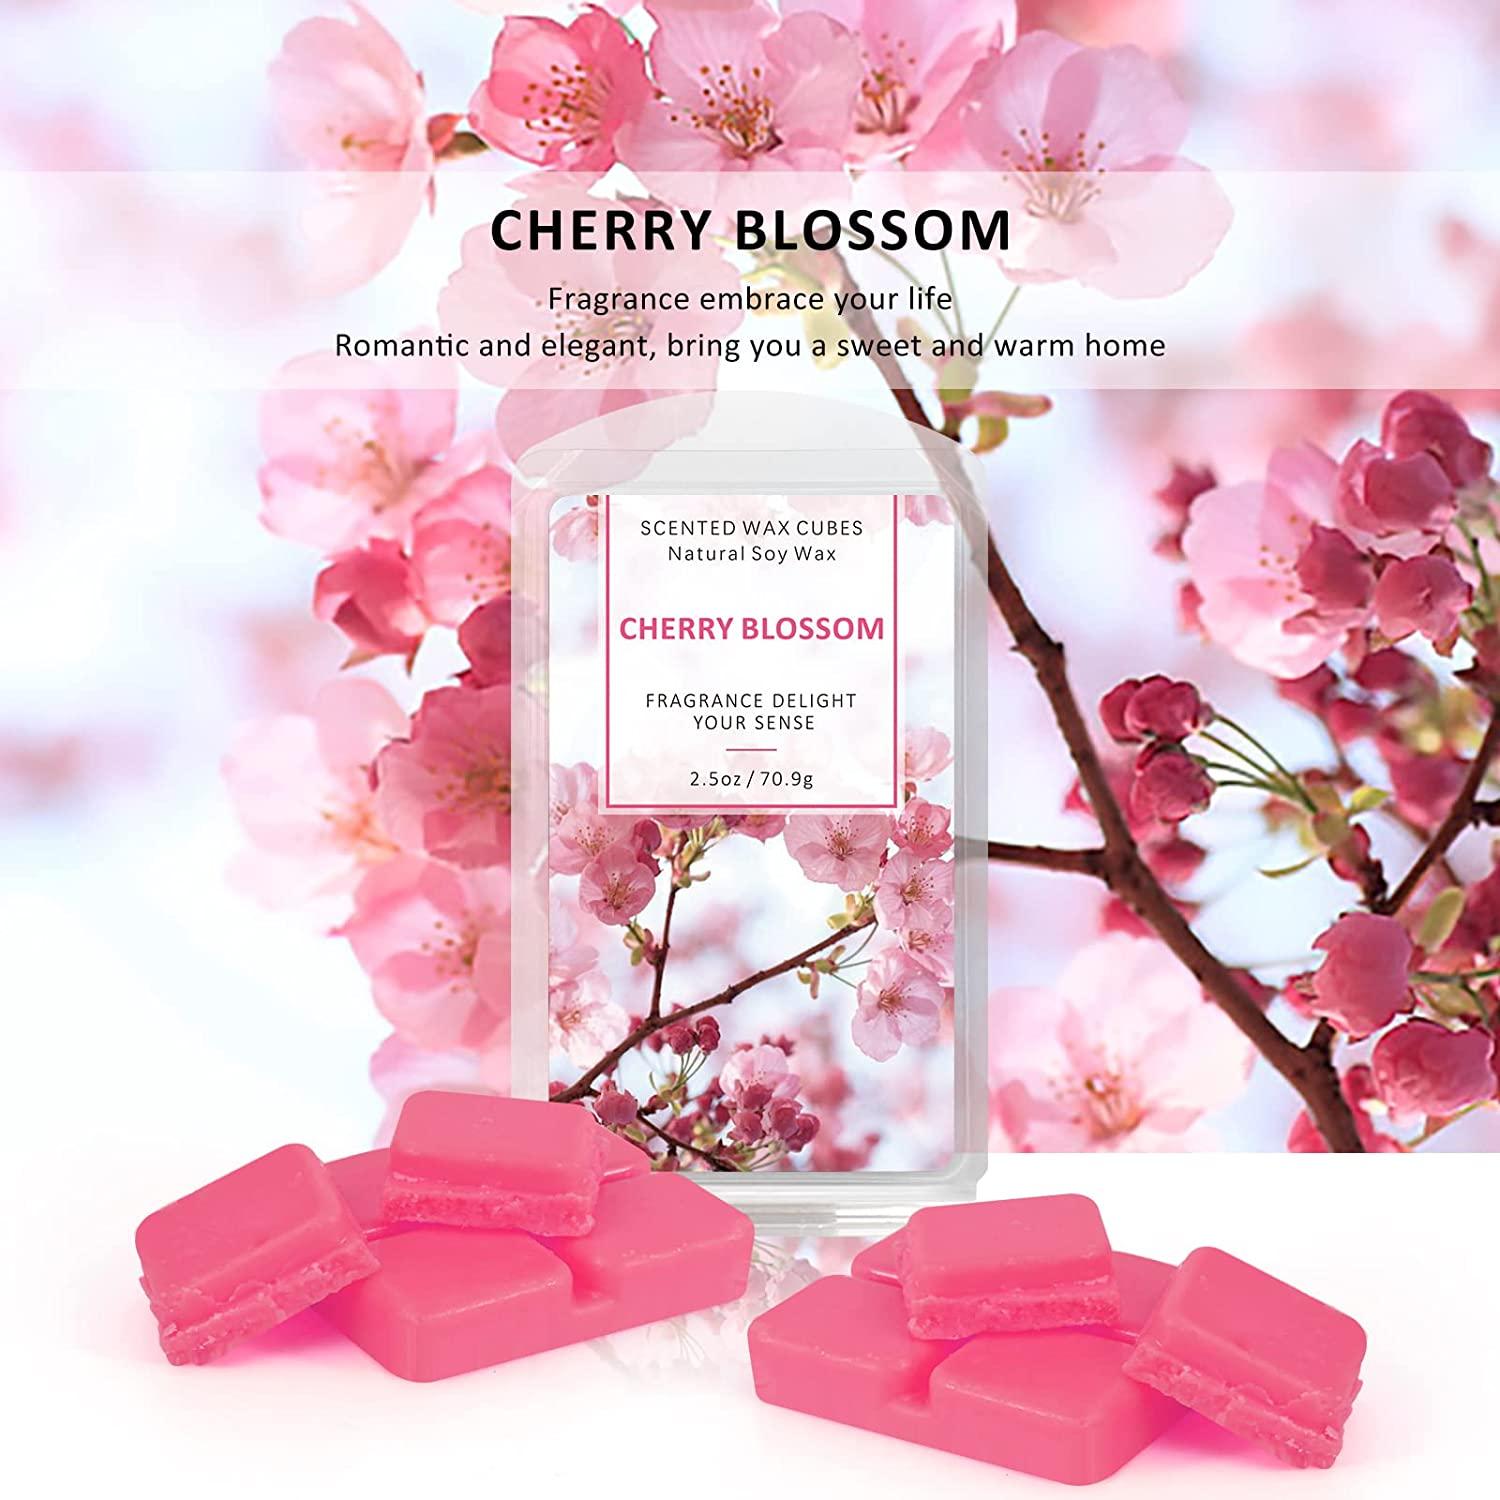 Plumeria Scented Wax Melts